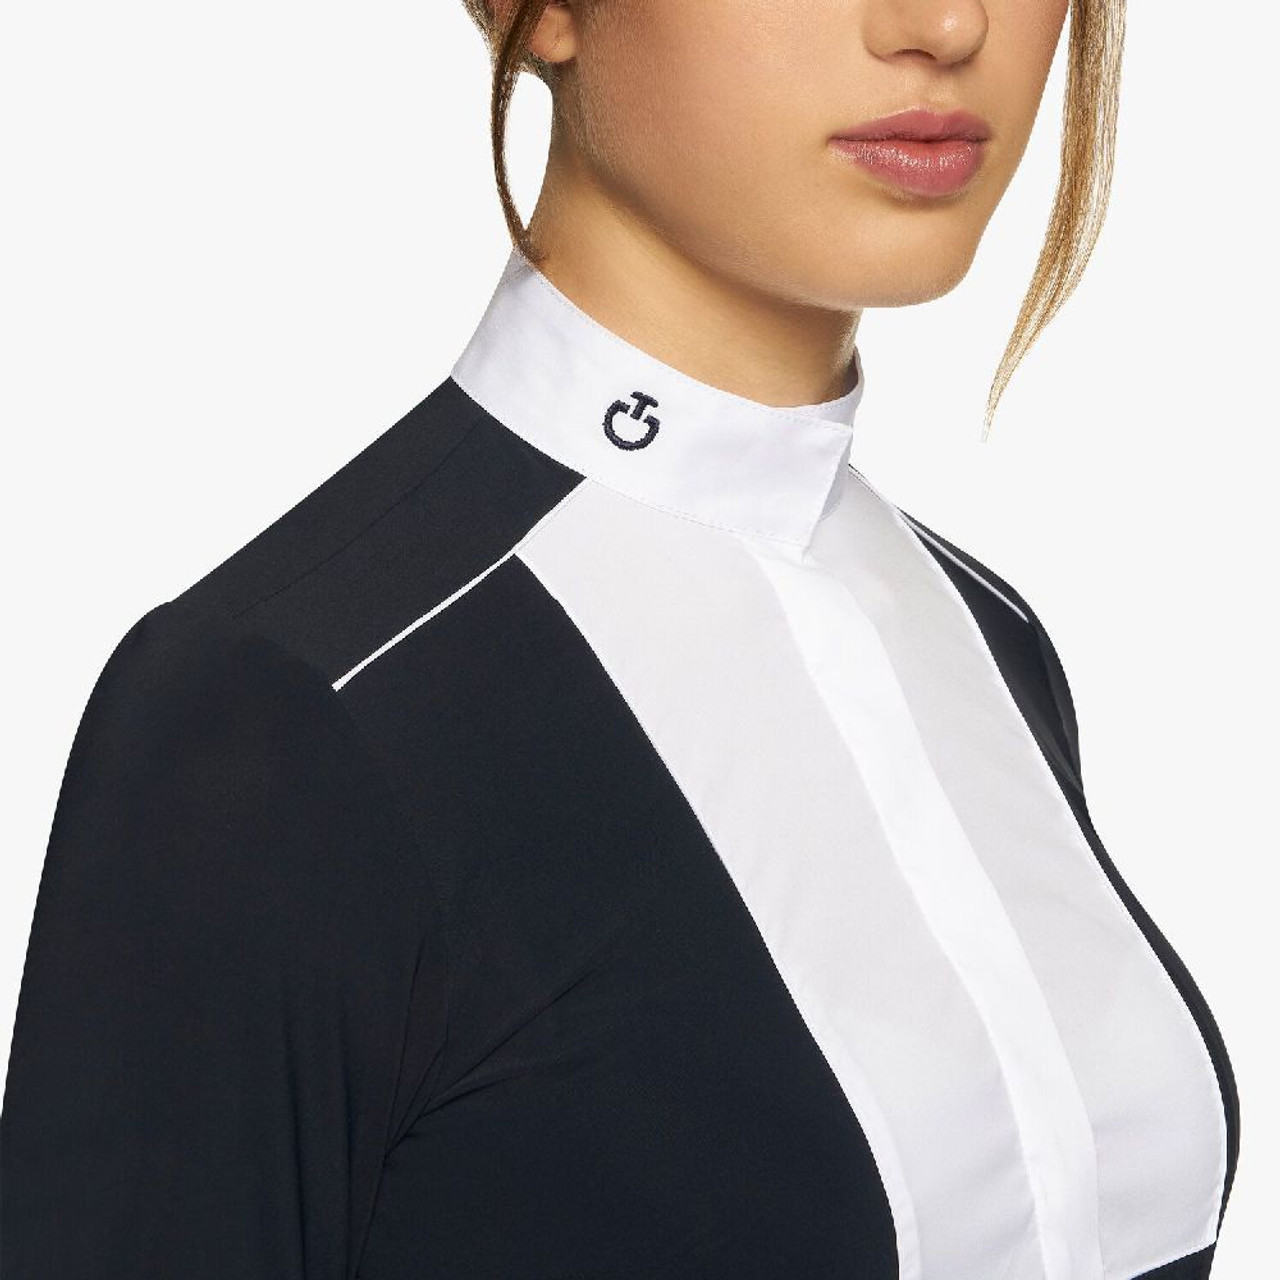 Cavalleria Toscana Outline Piping Shirt Long Sleeve- Show Shirts